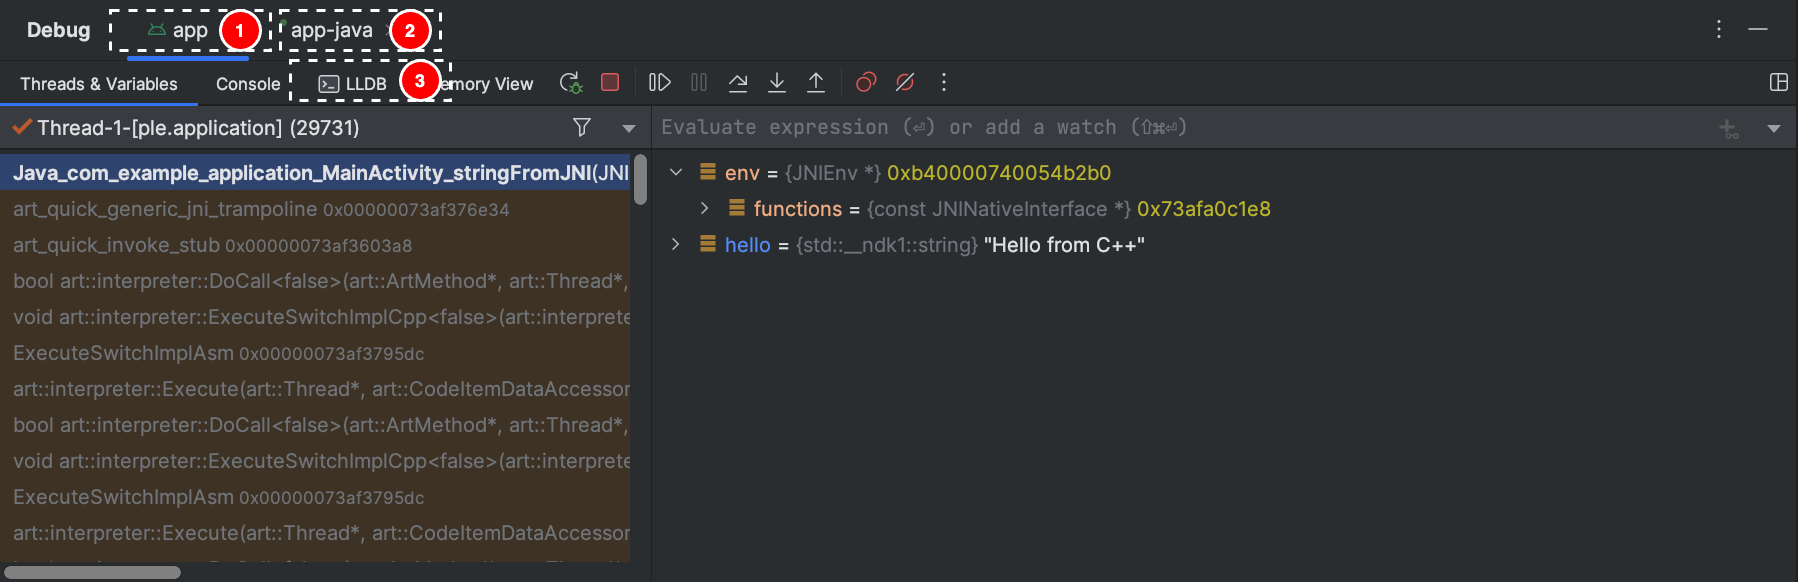 threads android studio debugging